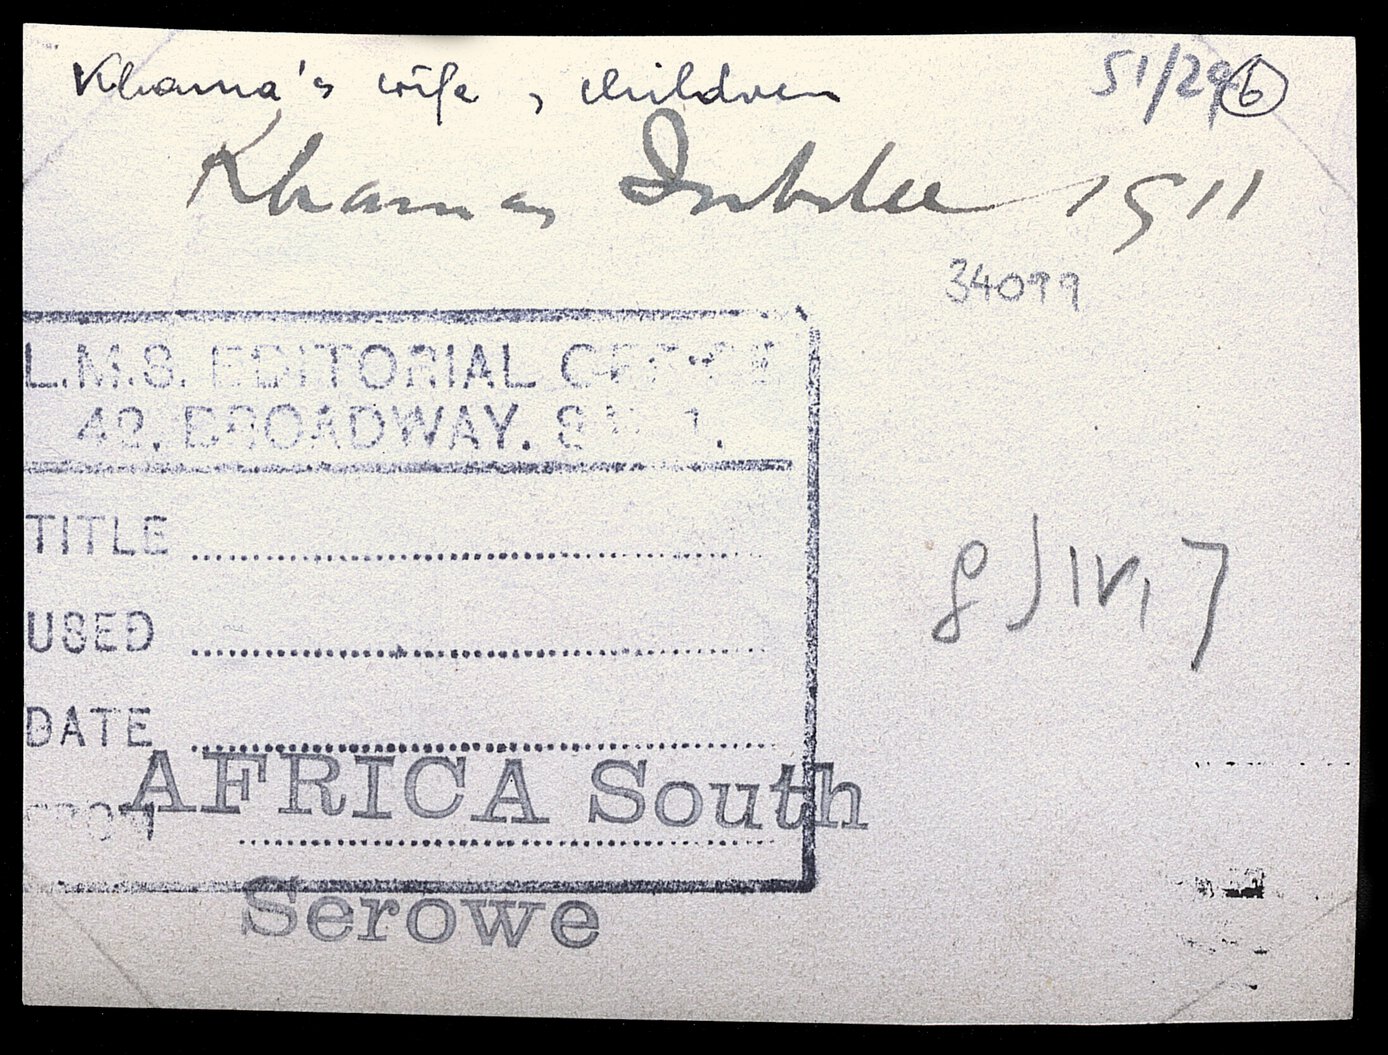 Verso of image: “Khama's wife, children” and dates to Khama's Jubilee 1911.”